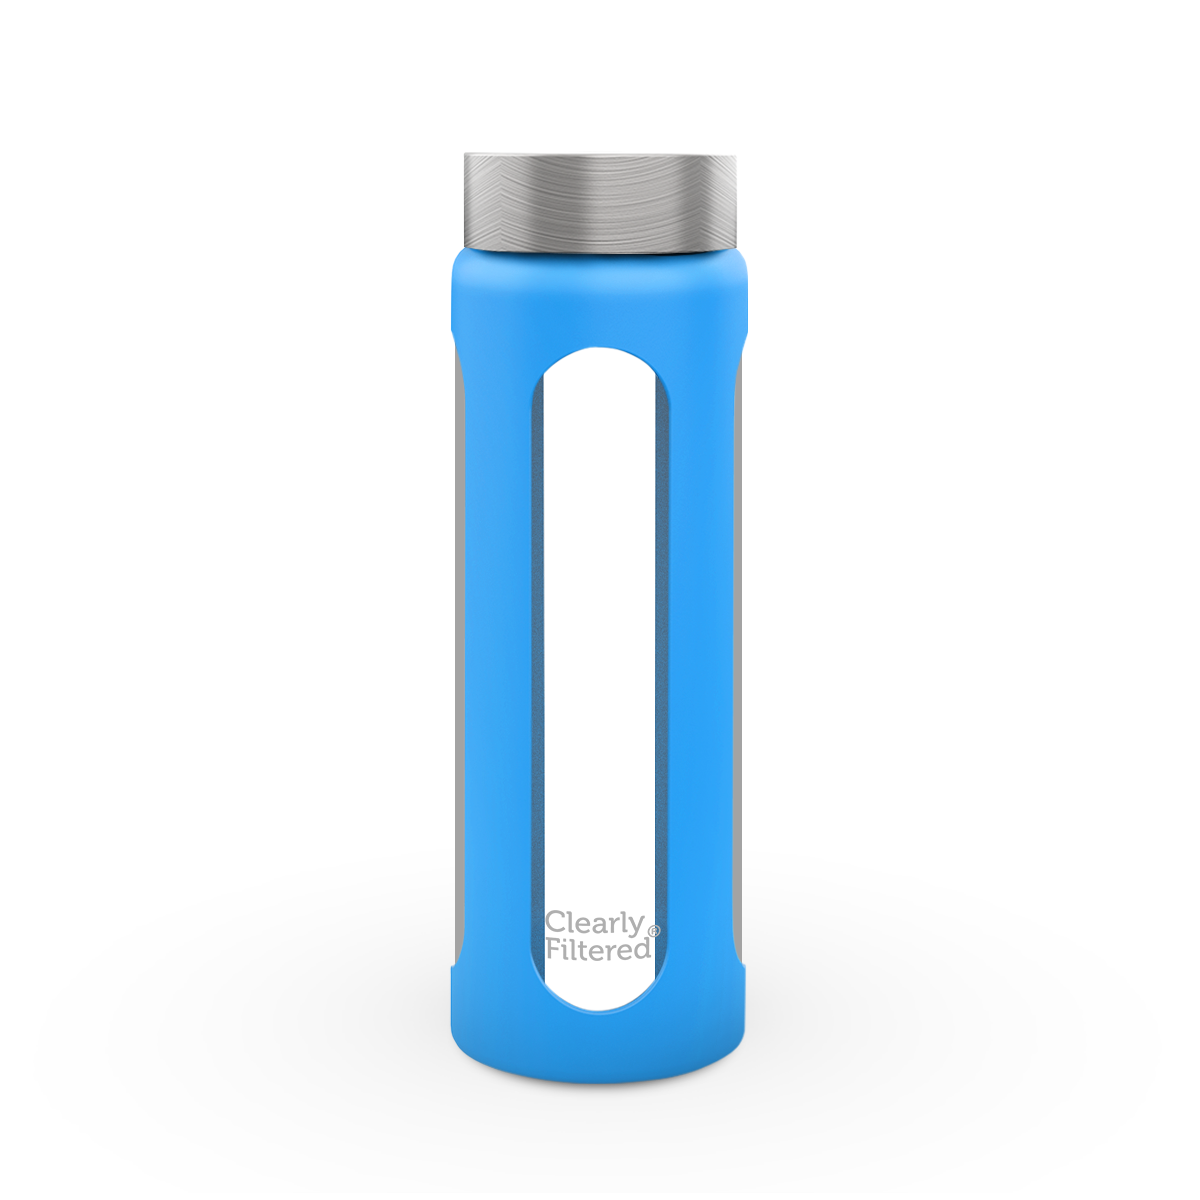 https://cdn.shopify.com/s/files/1/1011/0318/files/GlassWaterBottle_20oz_1.png?v=1694714849&width=3840&quality=75